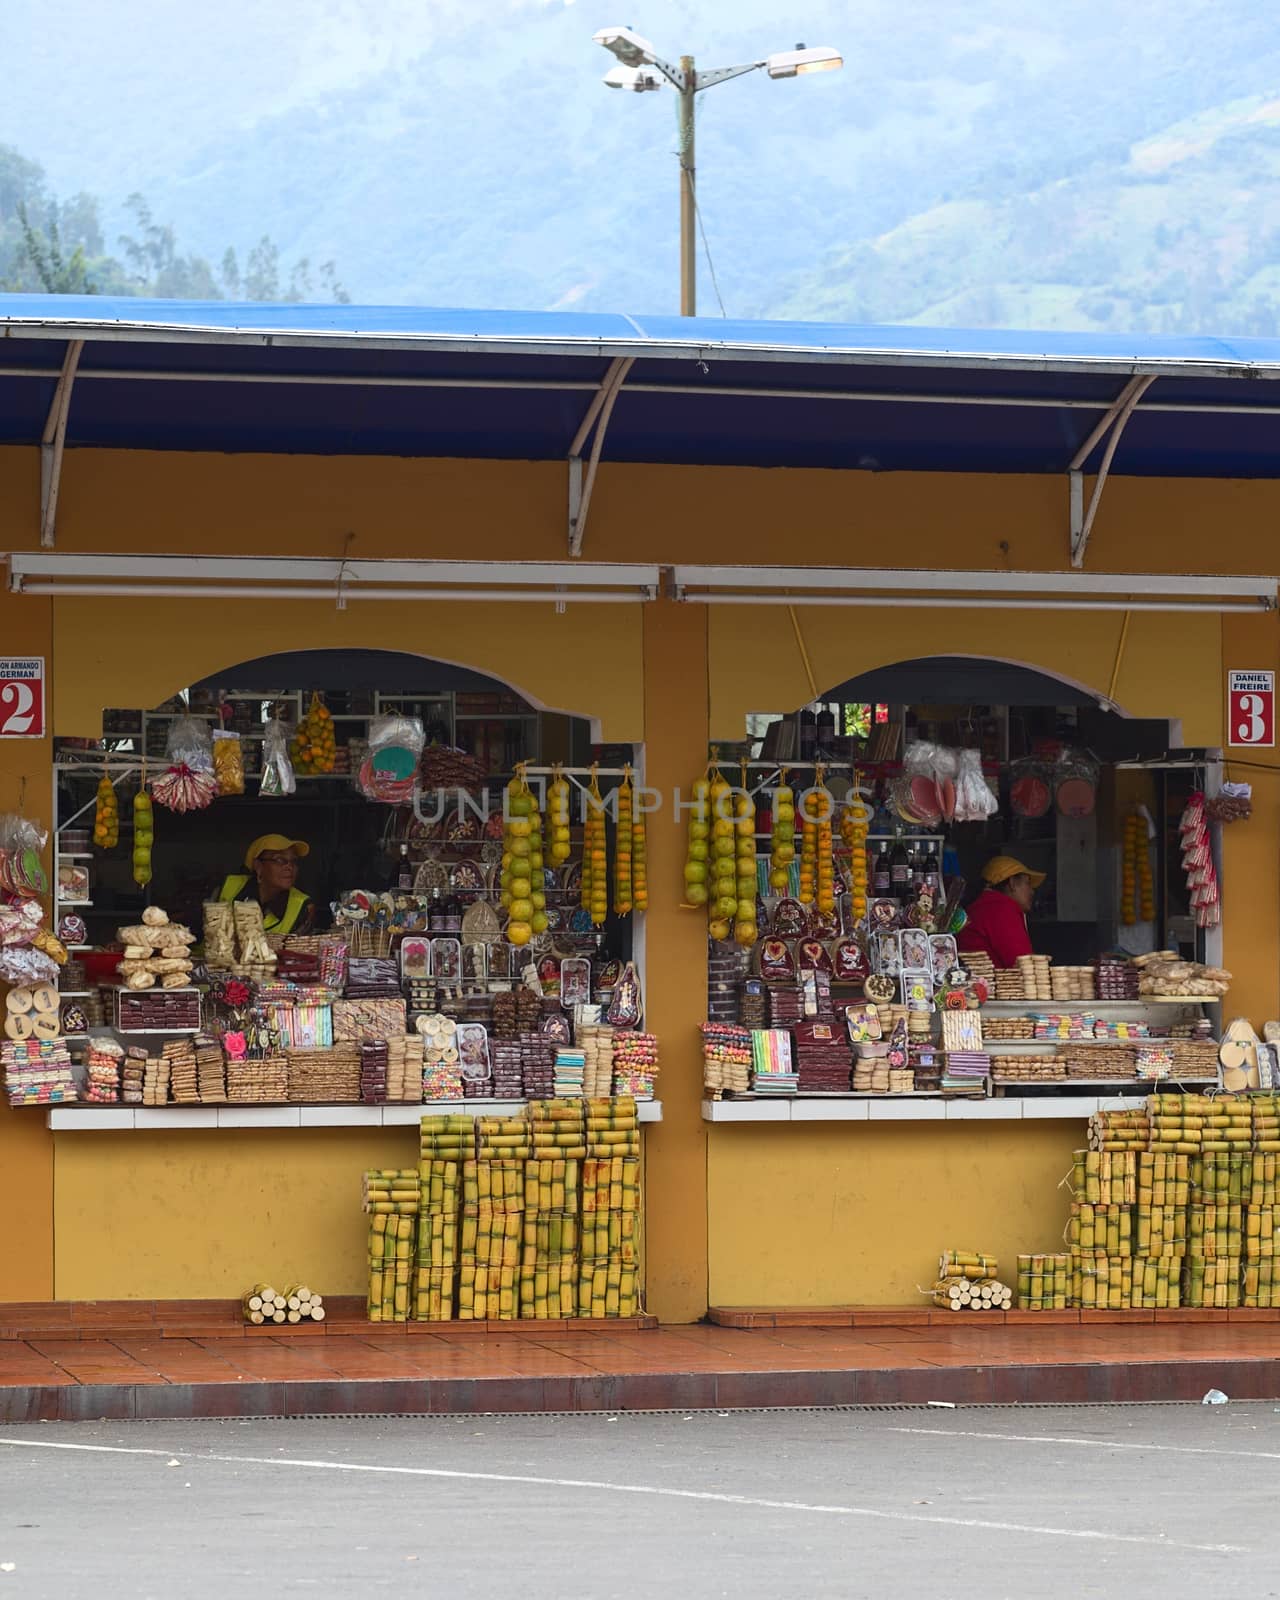 Sweet Stands in Banos, Ecuador by sven